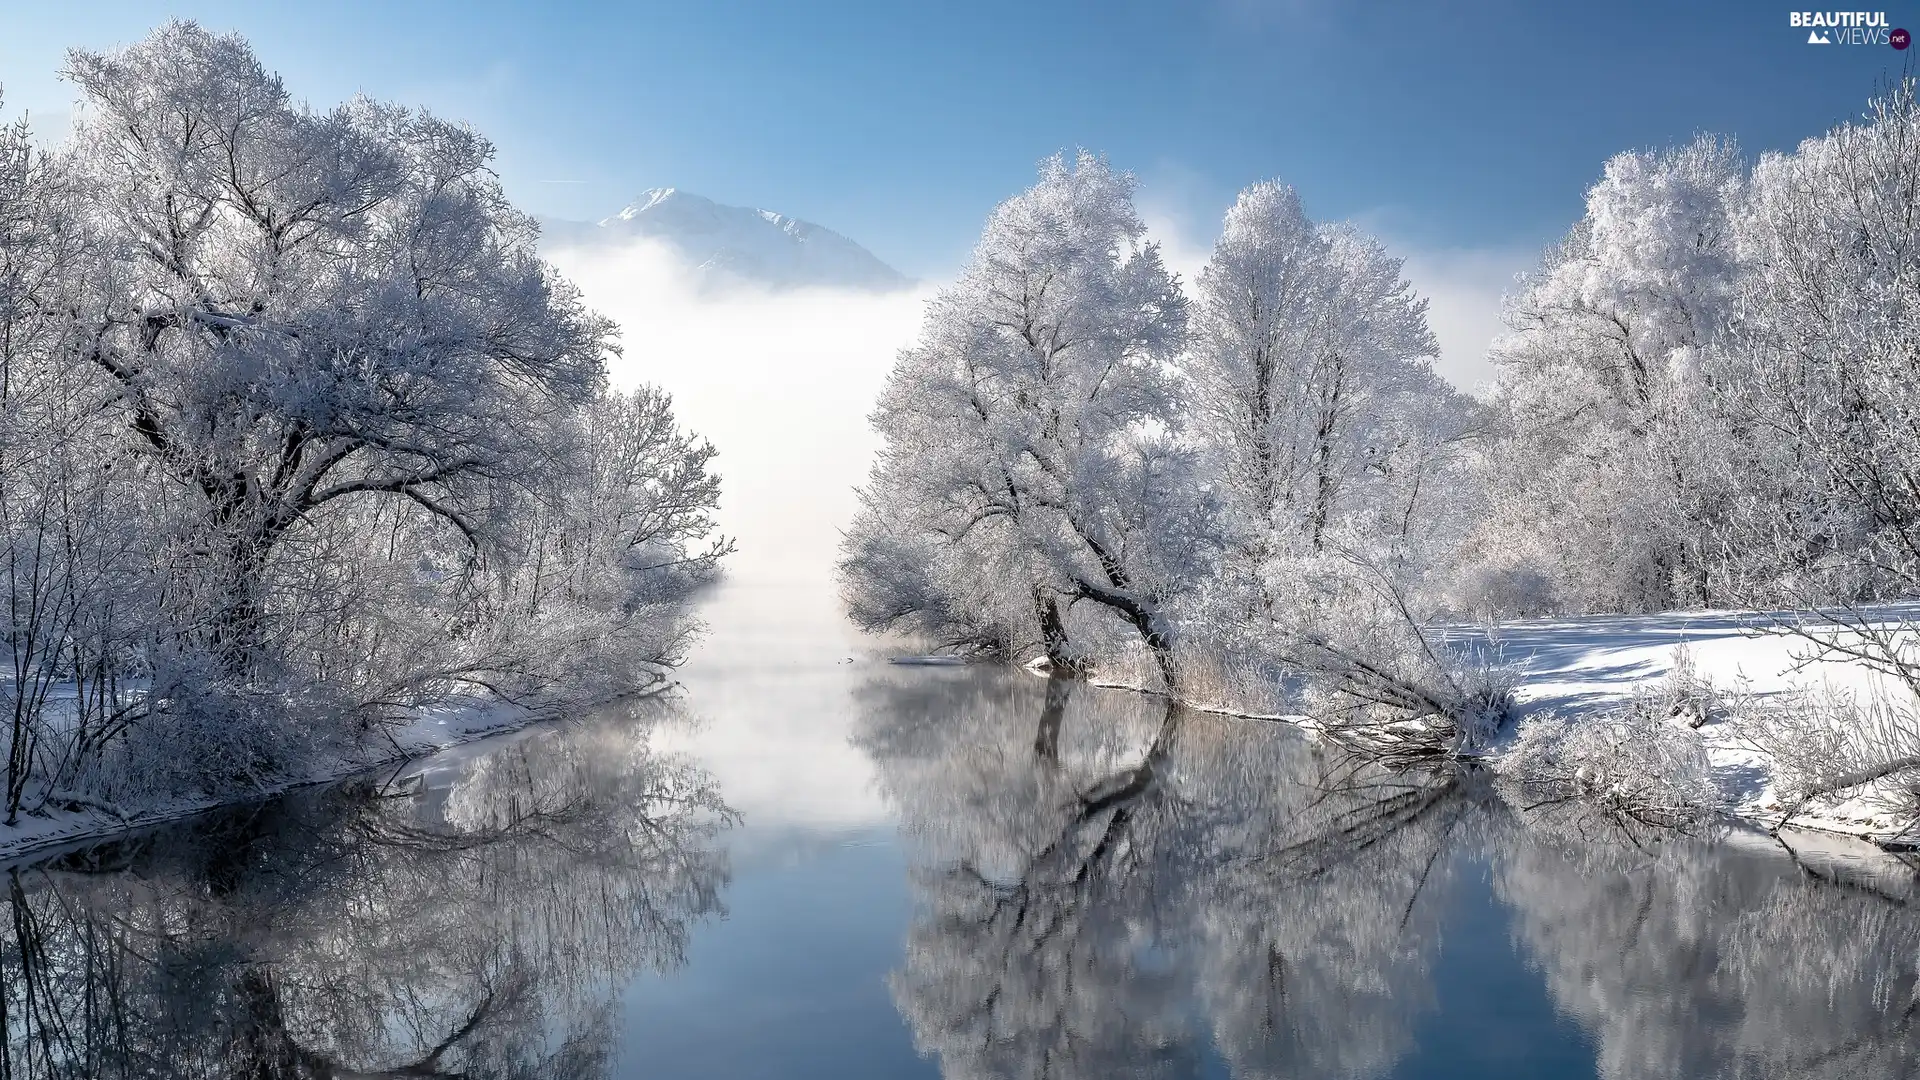 viewes, trees, Snowy, Bavarian Alps, Mountains, Bavaria, reflection, winter, Germany, water, River, snow